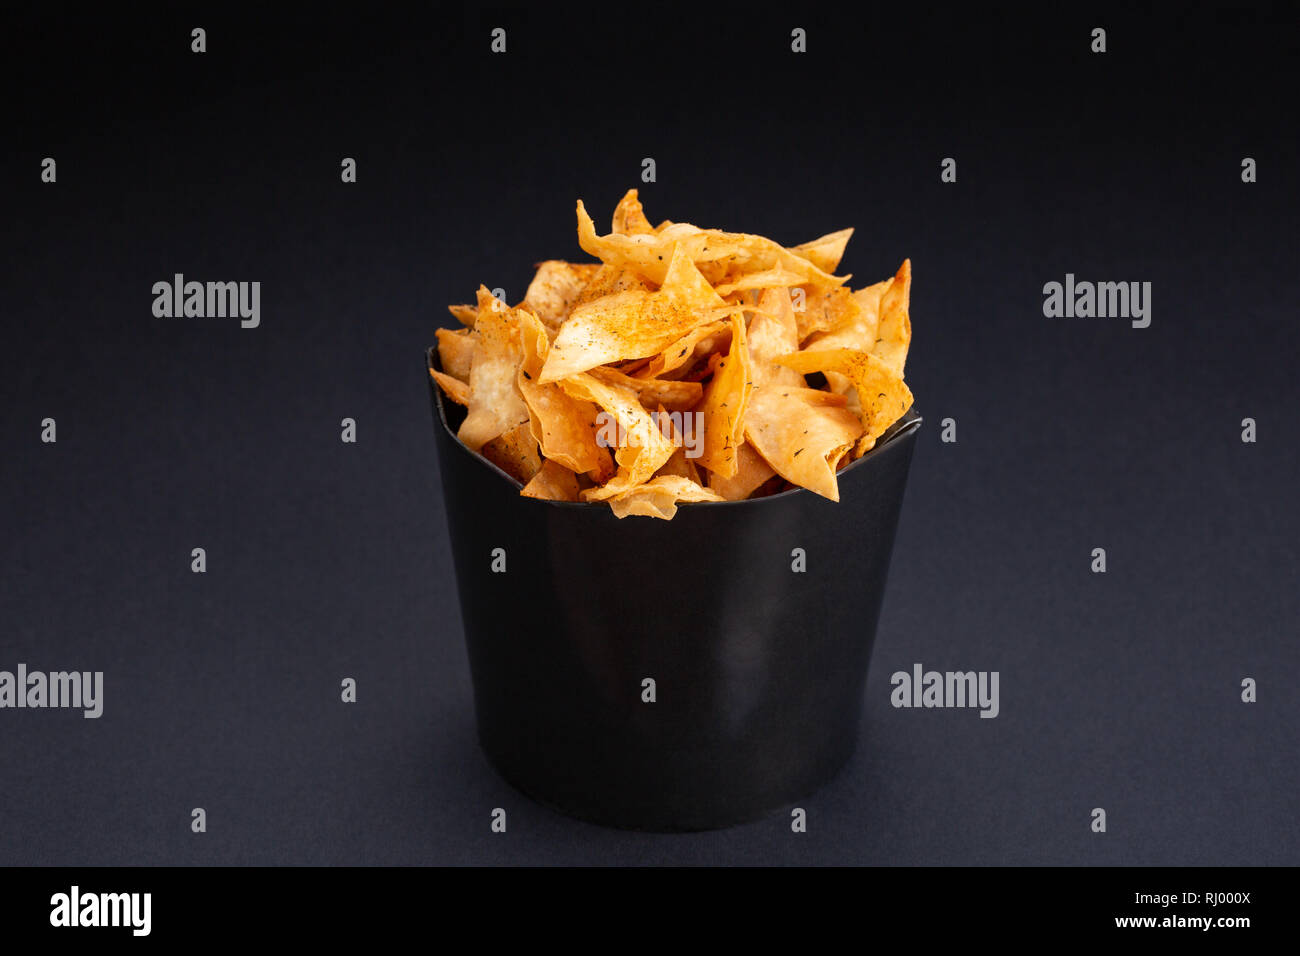 Potato chips in a bowl. A heap of potato crisps piled up in a bowl. The food is sitting on a black background. Stock Photo